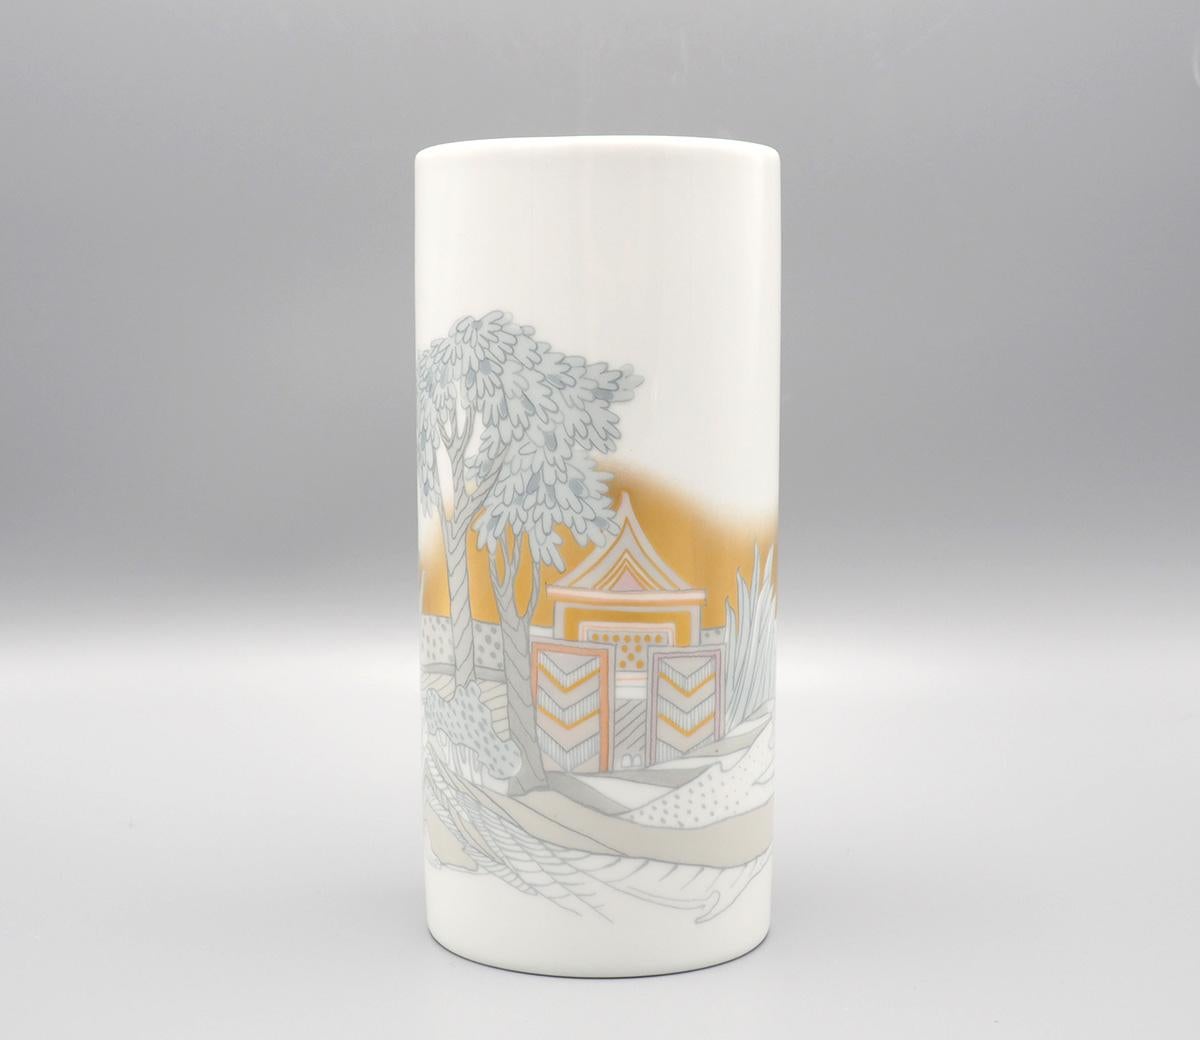 Porcelain Studio Linie (Line) art vase produced by Rosenthal Germany in the 1970s.

The cylinder-shaped vase has an abstract representation of a Japanese garden with a house and tree against a golden sky.

The decor is in beautiful soft shiny